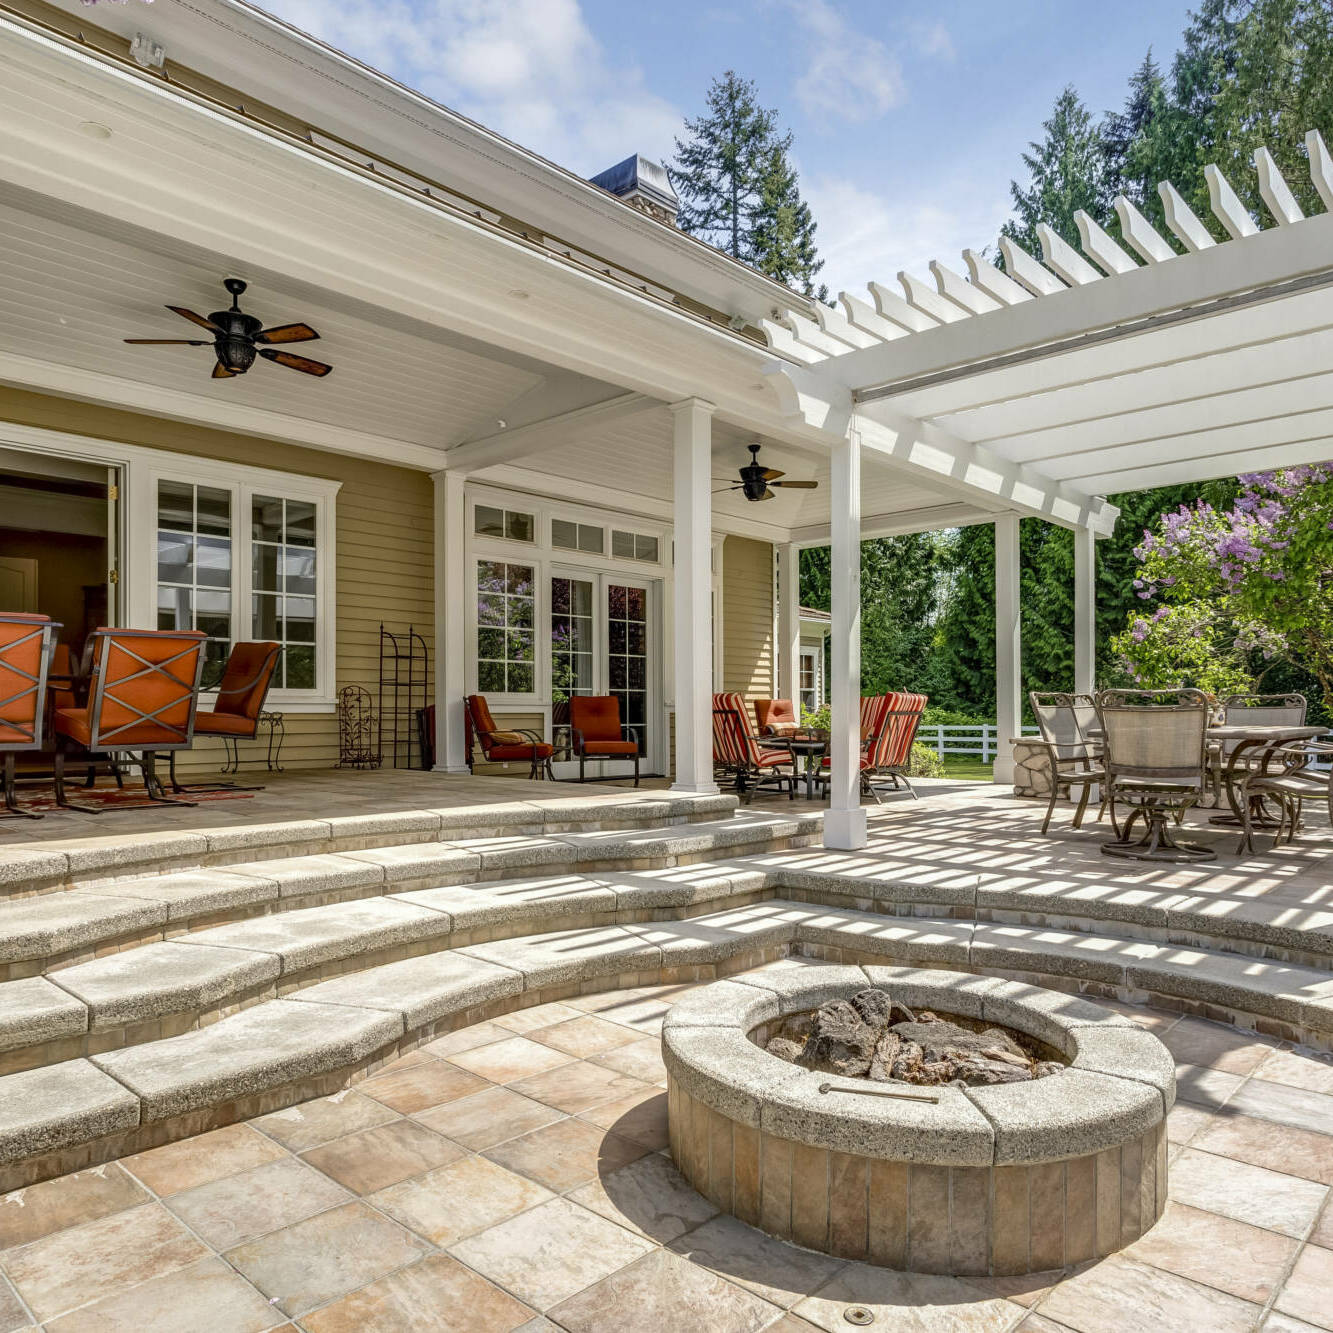 Lovely outdoor deck patio space with white pergola, fire pit in the backyard of a luxury house.